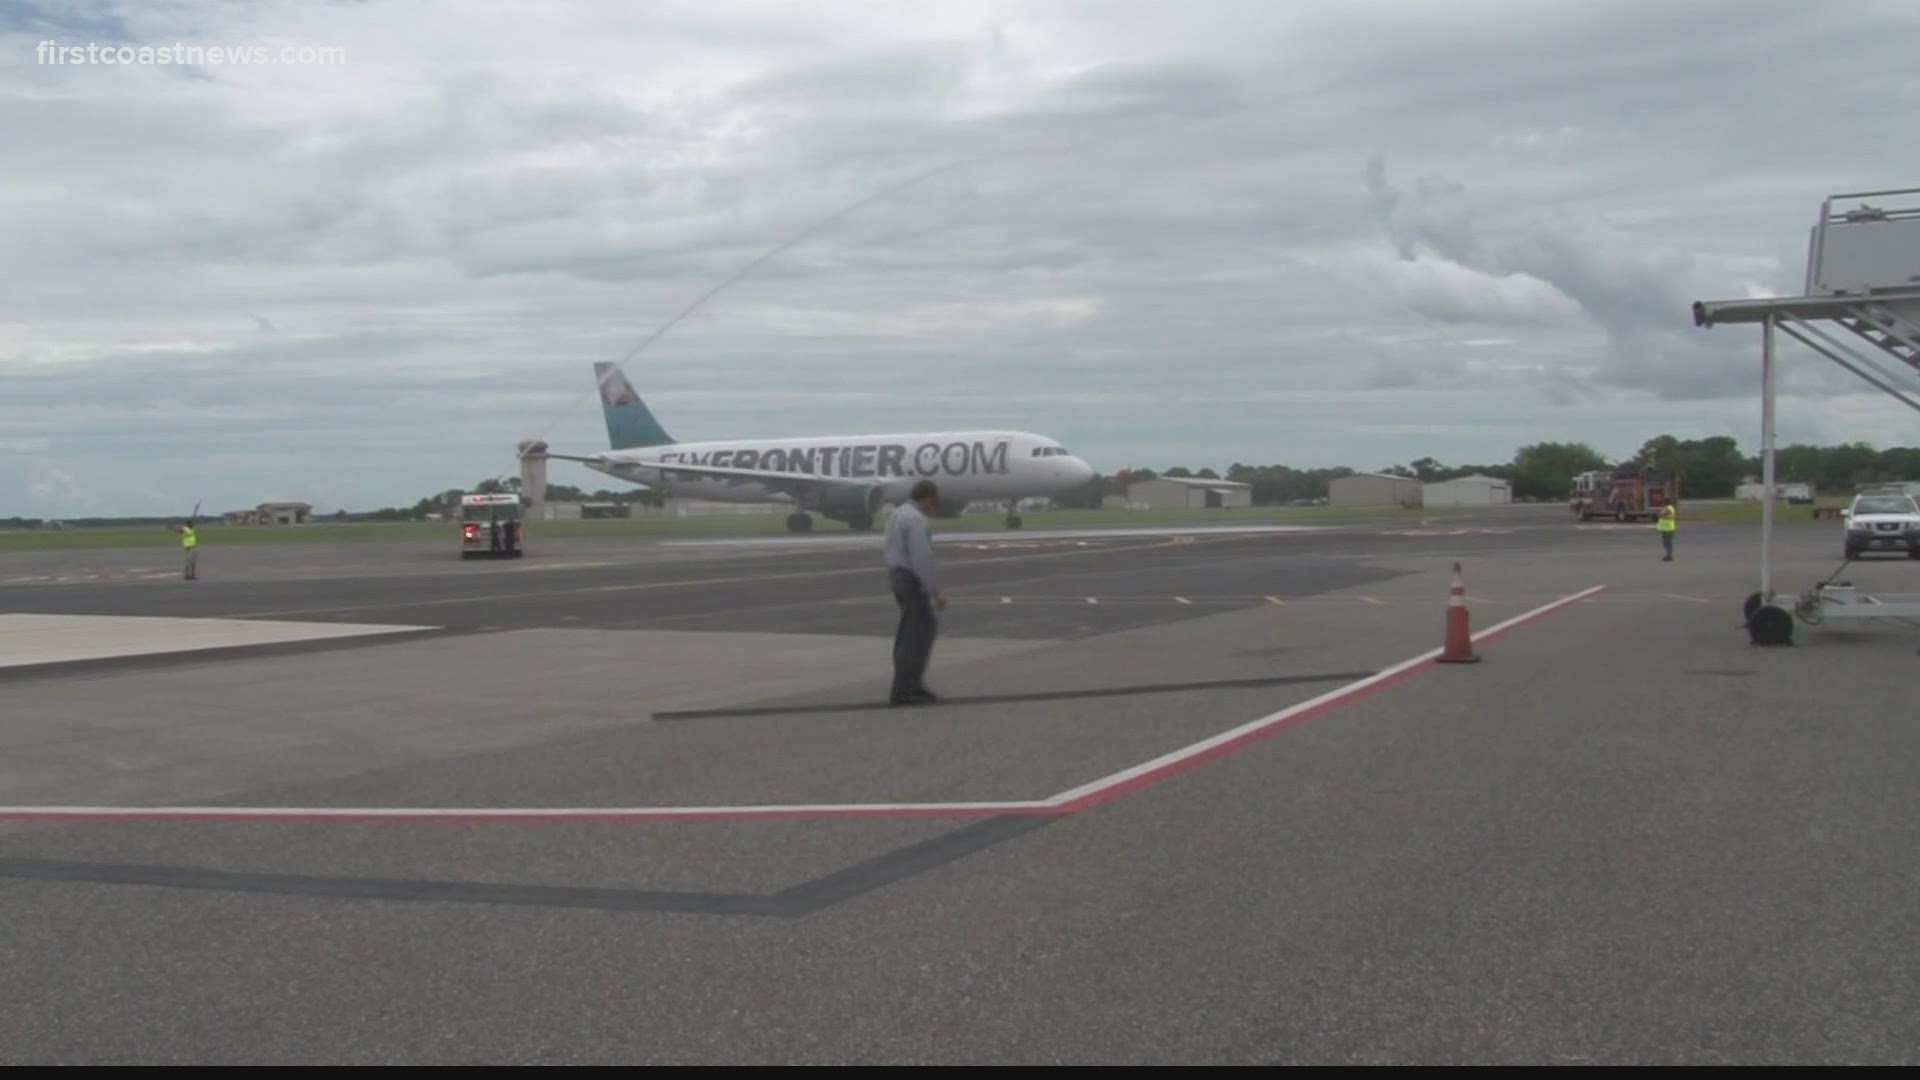 St. Augustine airport wants to be back in the commercial flight biz